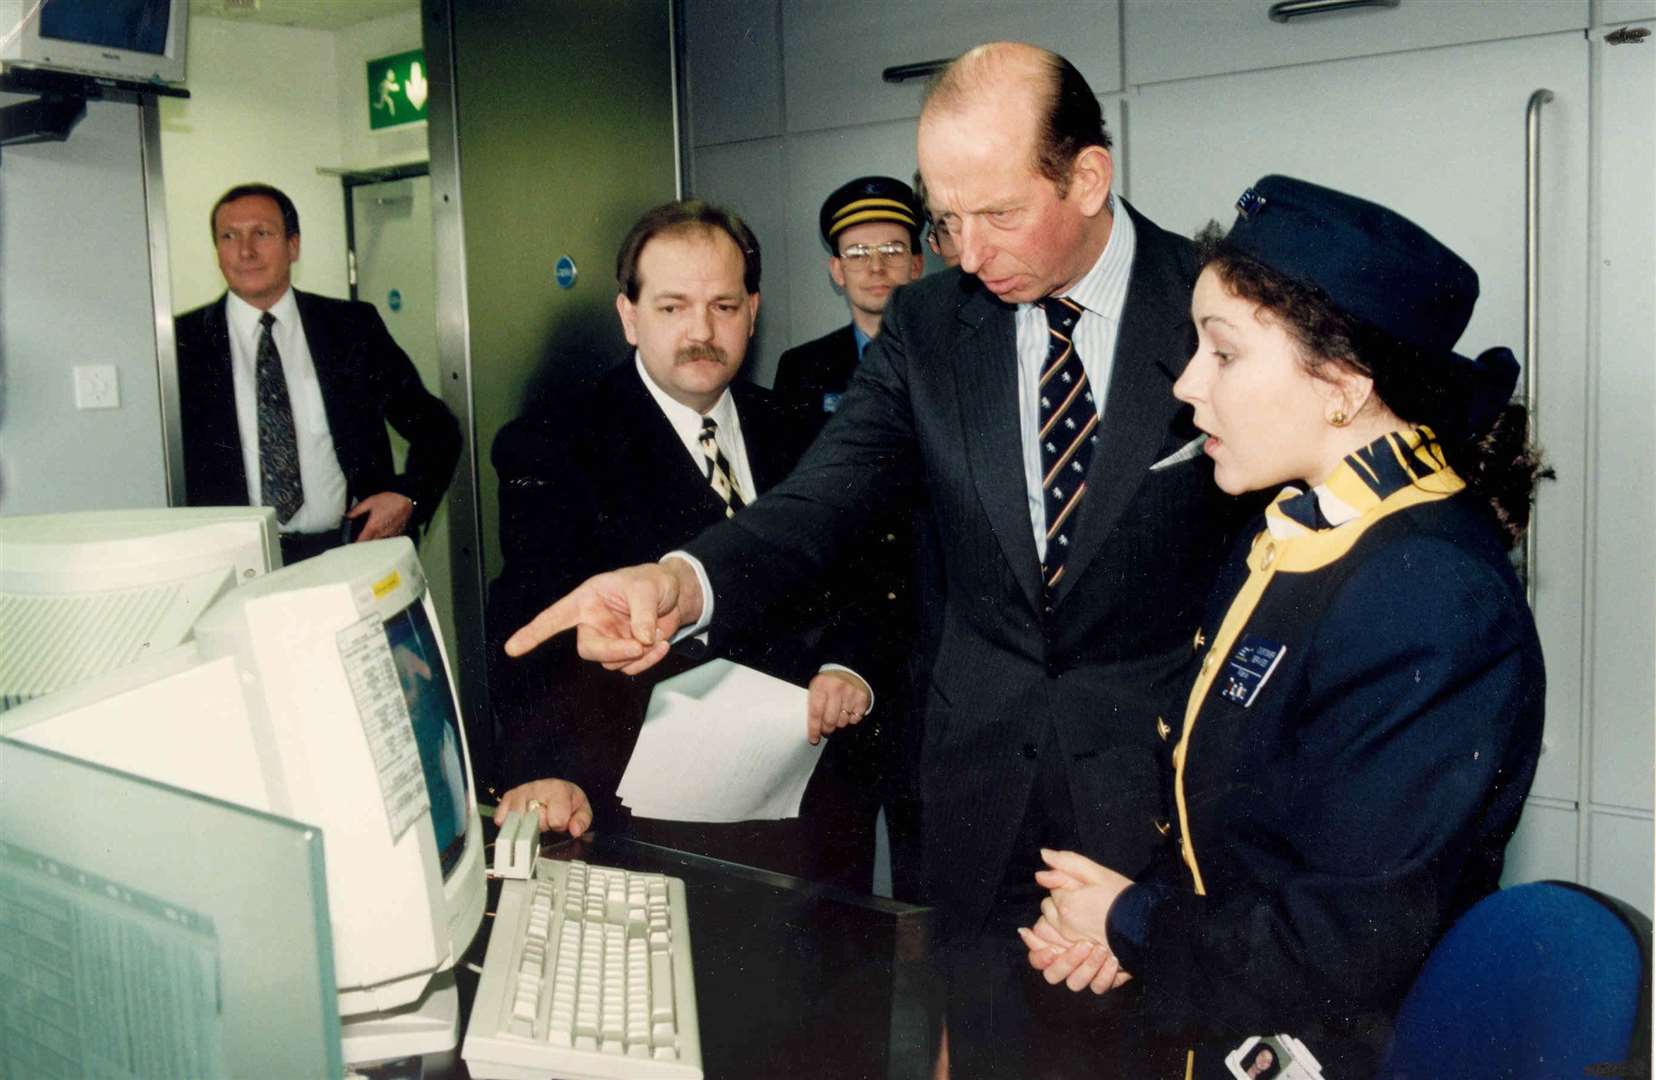 The Duke of Kent travelled to Ashford International by train from London with Transport Secretary Sir George Young for the opening ceremony. Customer care worker Maria Lawrence is pictured explaining to the Duke how to book a ticket